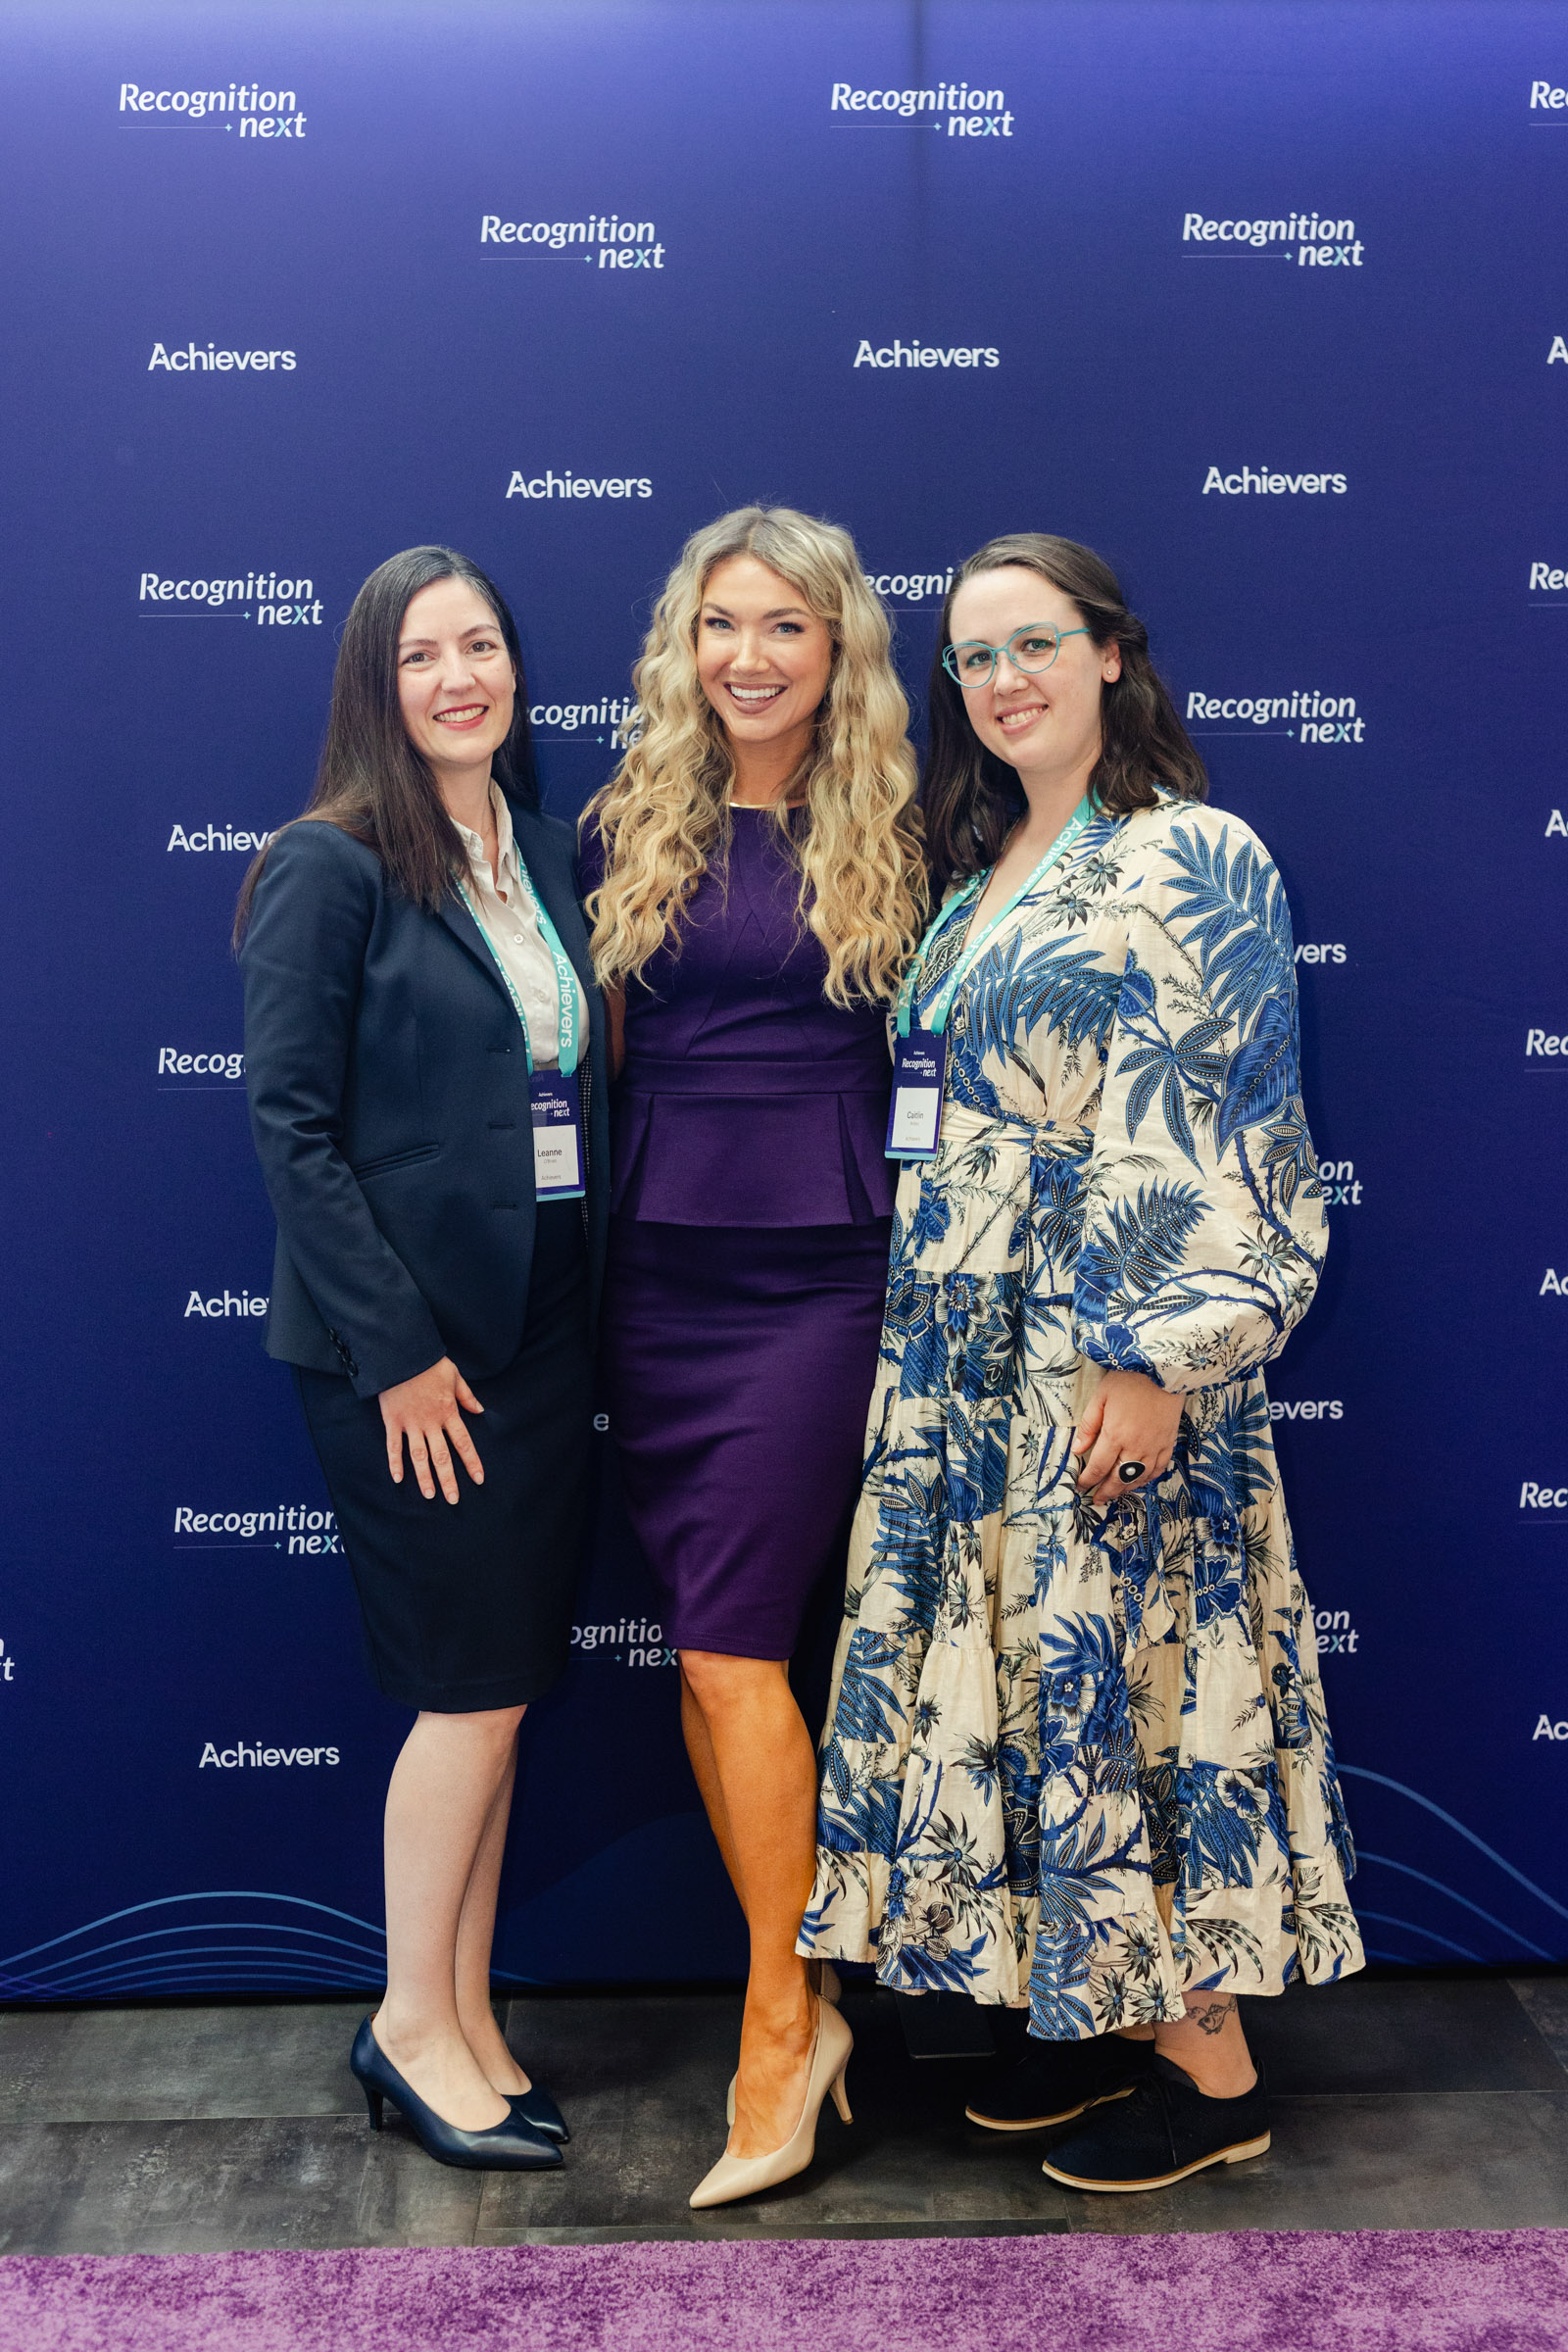 Three women stand in front of a blue "Recognition Next" event backdrop. Two are dressed in business attire, and the third wears a floral dress. All are smiling at the camera, capturing a moment of event photography at its finest.